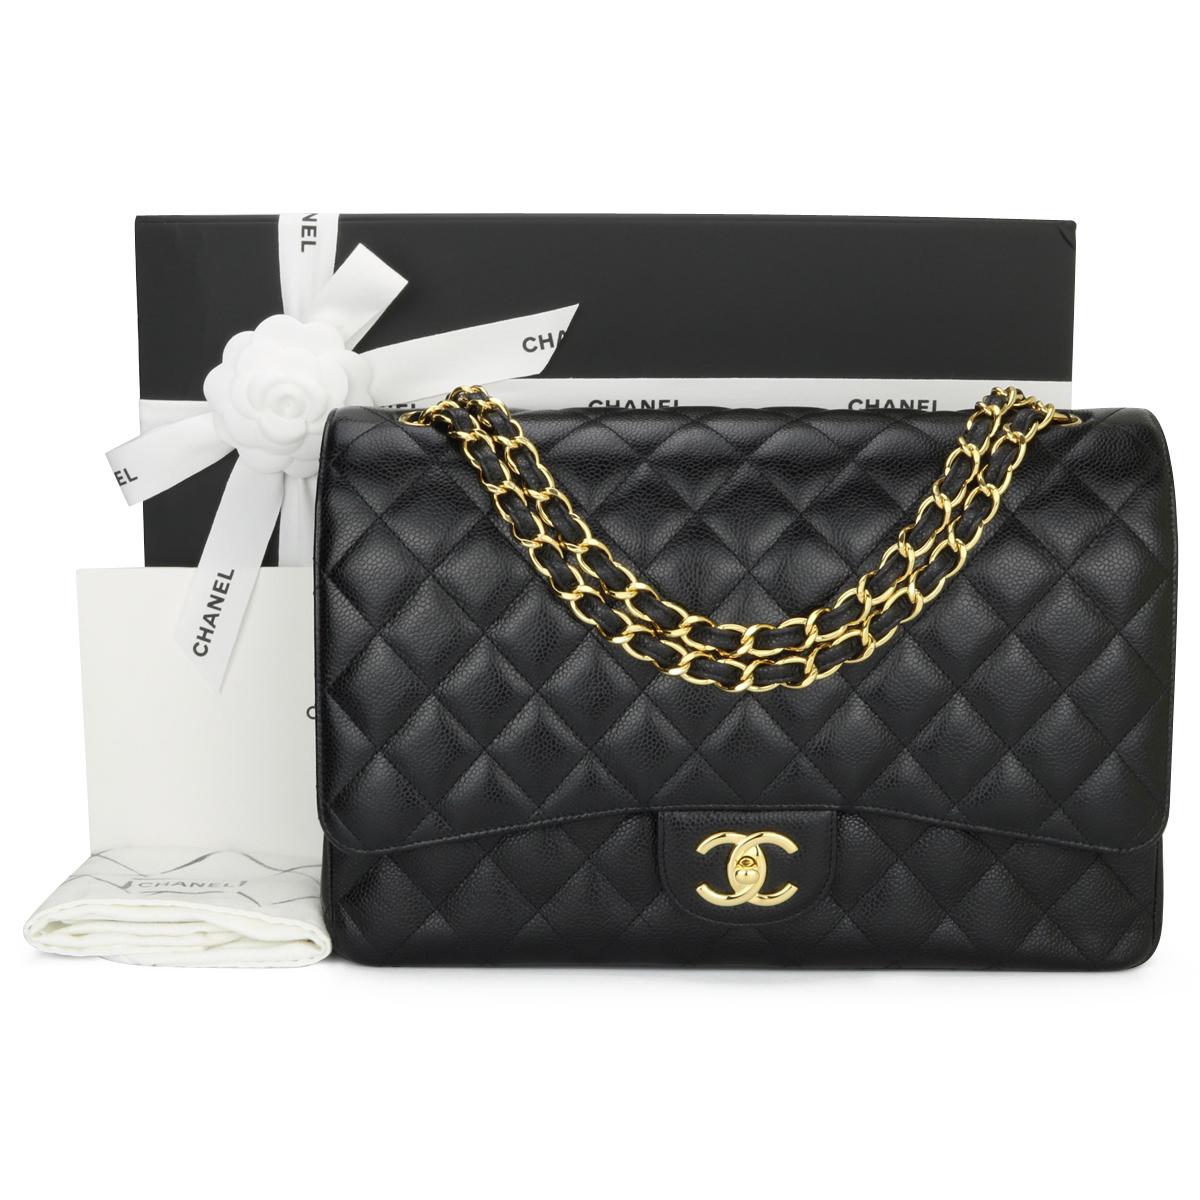 CHANEL Classic Double Flap Maxi Bag Black Caviar with Gold Hardware 2018.

This stunning bag is in excellent condition, the bag still holds its original shape, and the hardware is still very shiny.

- Exterior Condition: Excellent condition. Corners